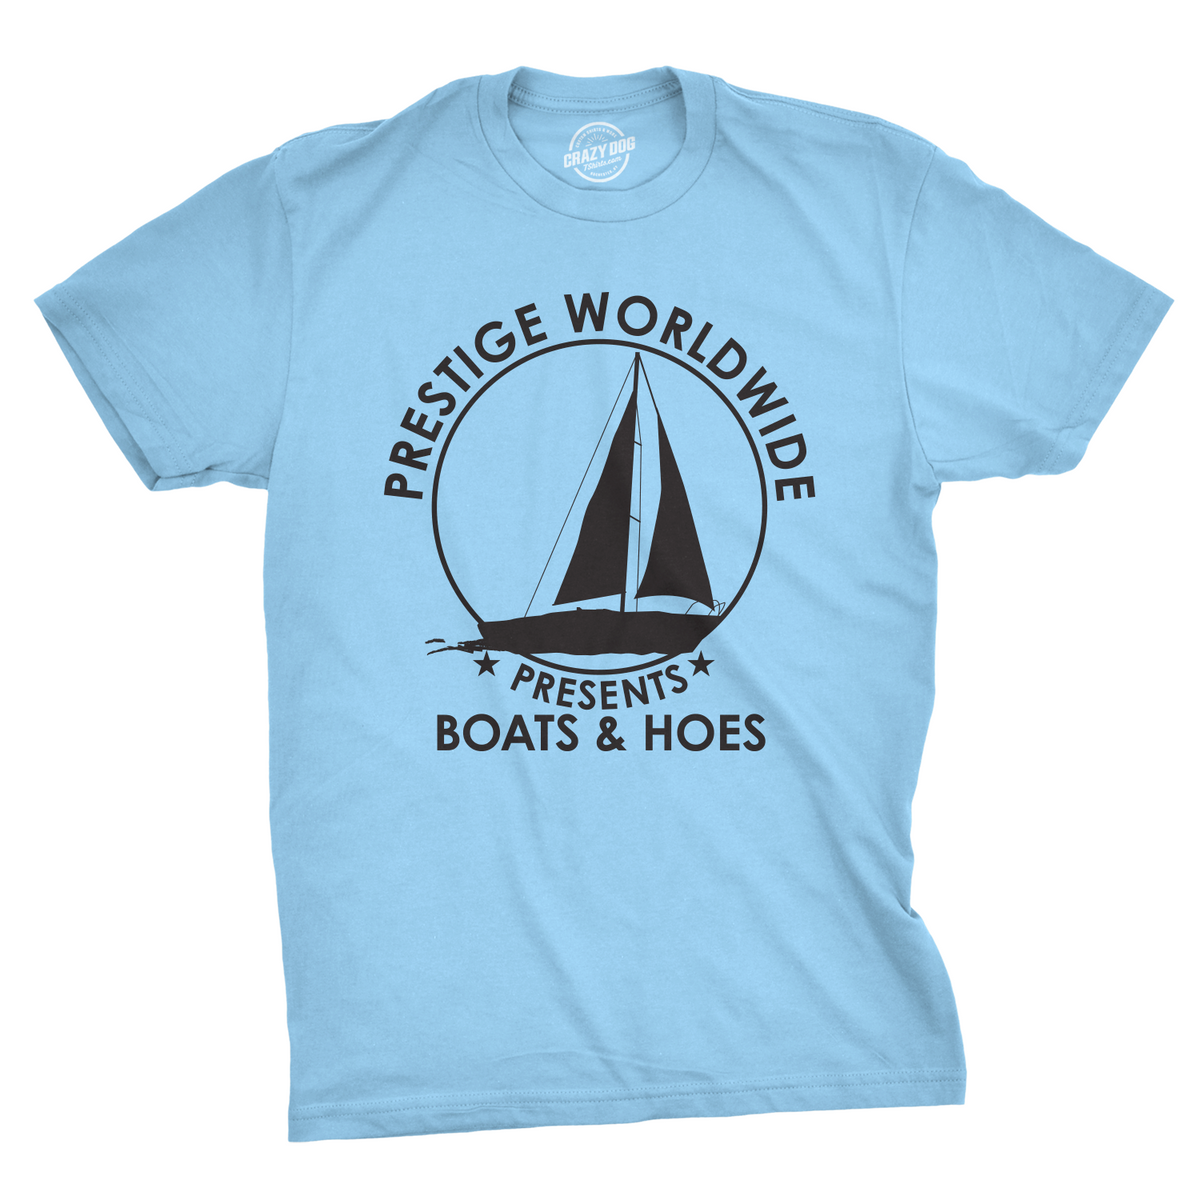 Funny Light Blue Prestige Worldwide Boats &amp; Hoes Mens T Shirt Nerdy TV &amp; Movies Tee